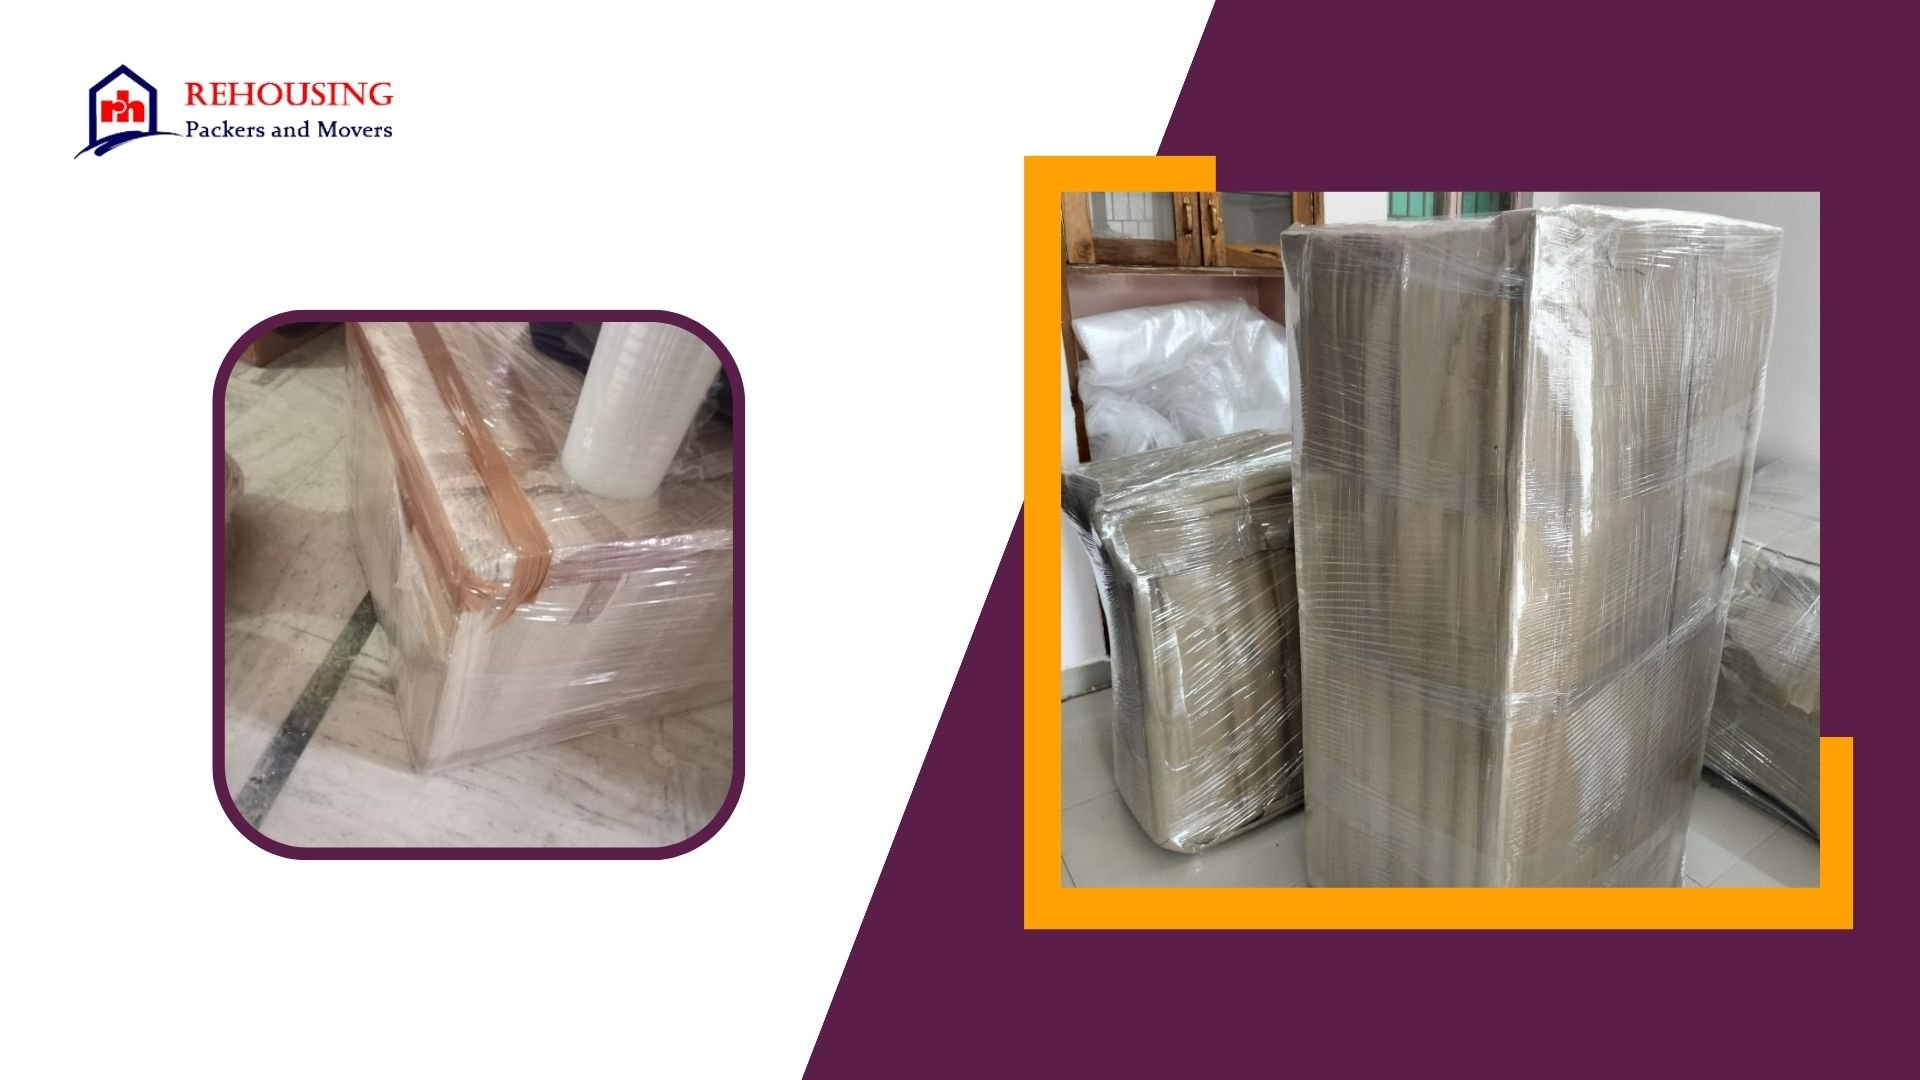 A Seamless Journey: Packers and Movers from Faridabad to Gurgaon